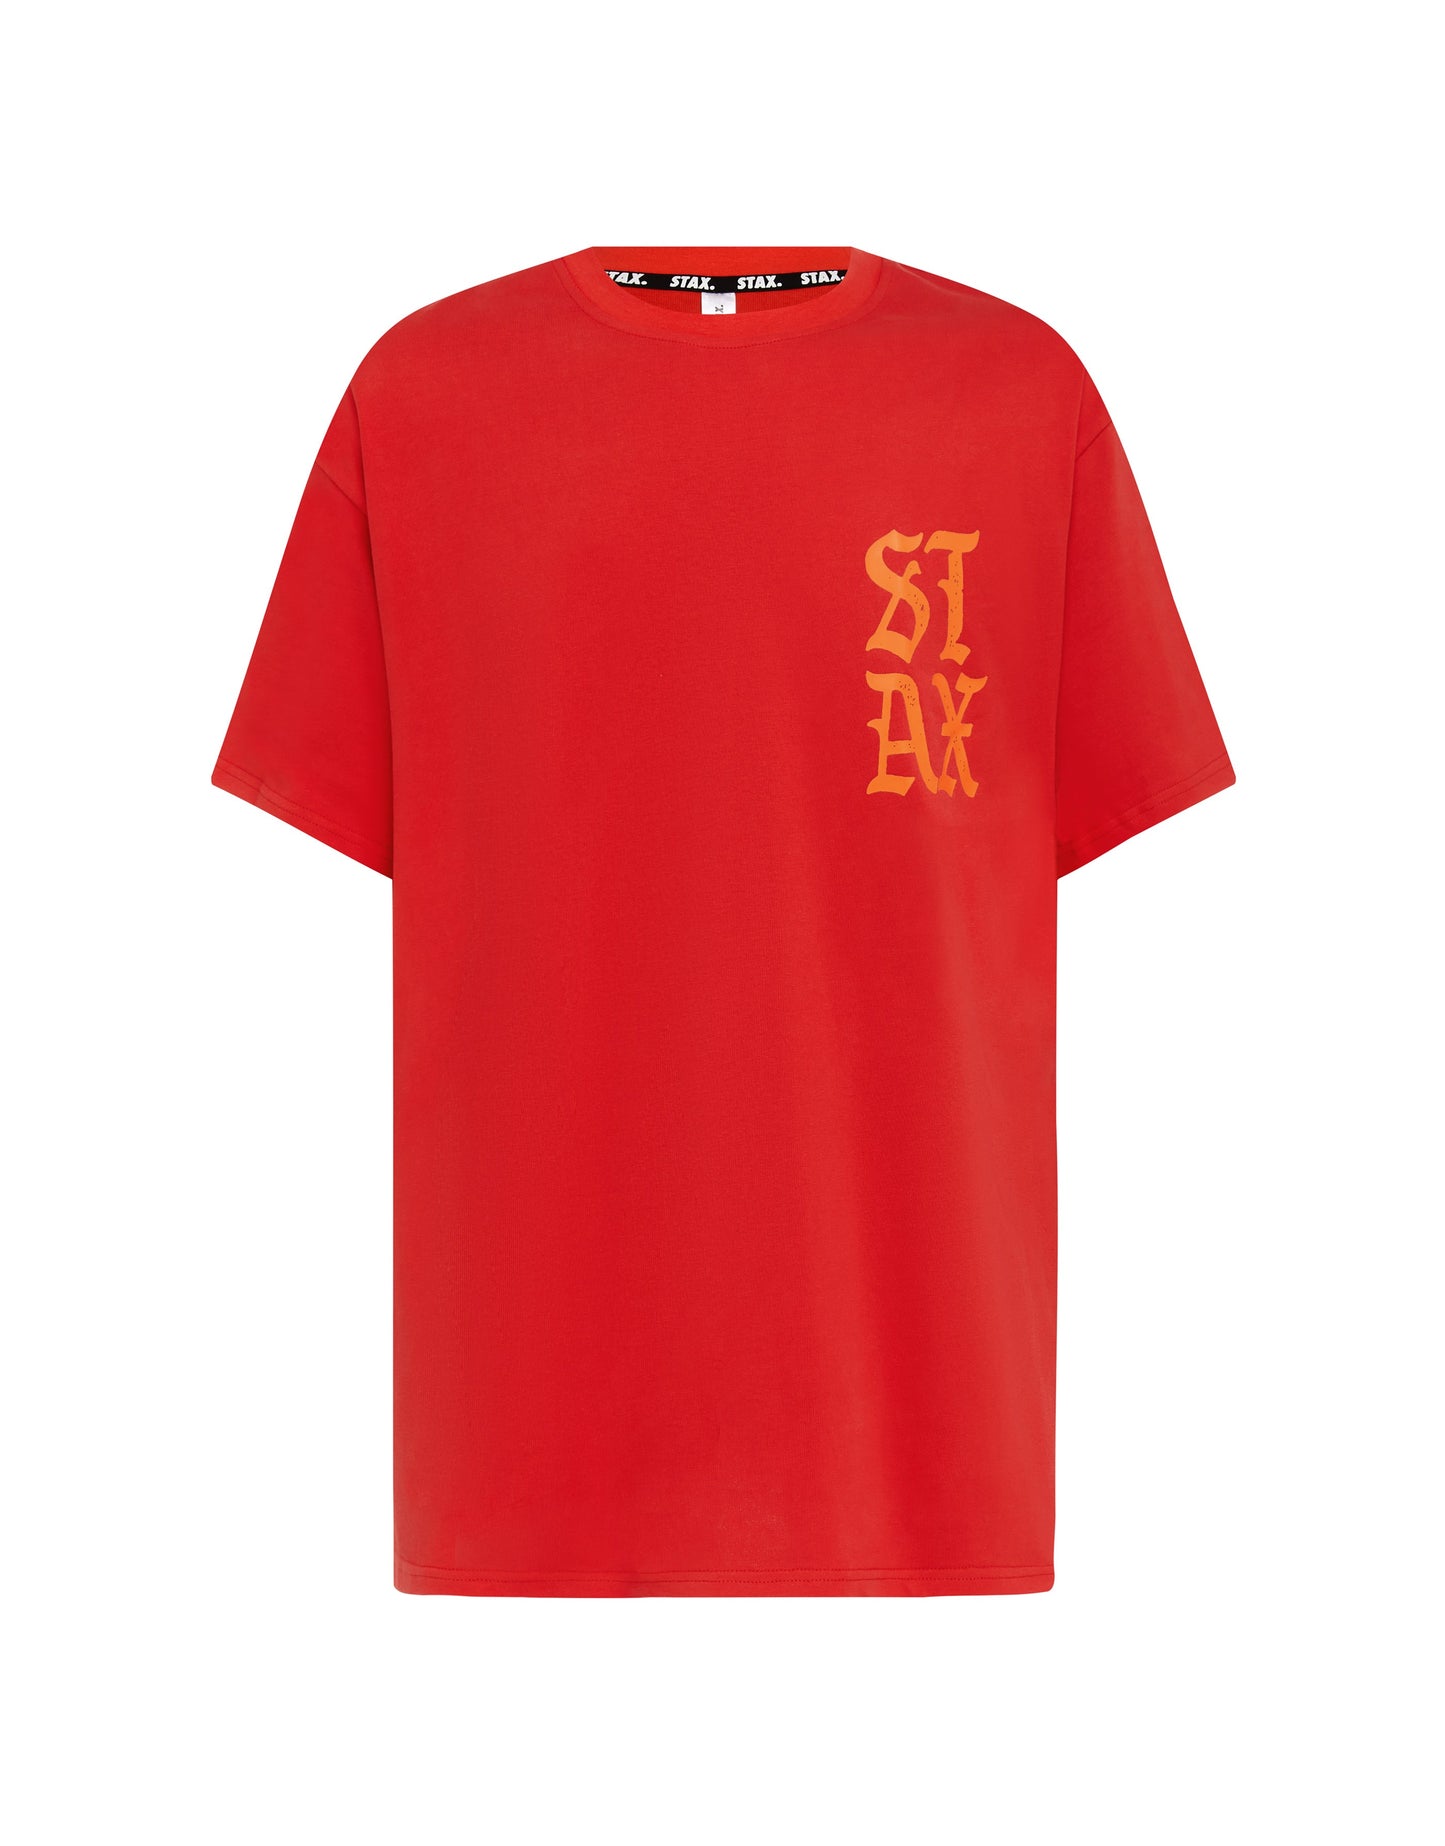 STAX. Old English Mens Tee - Red